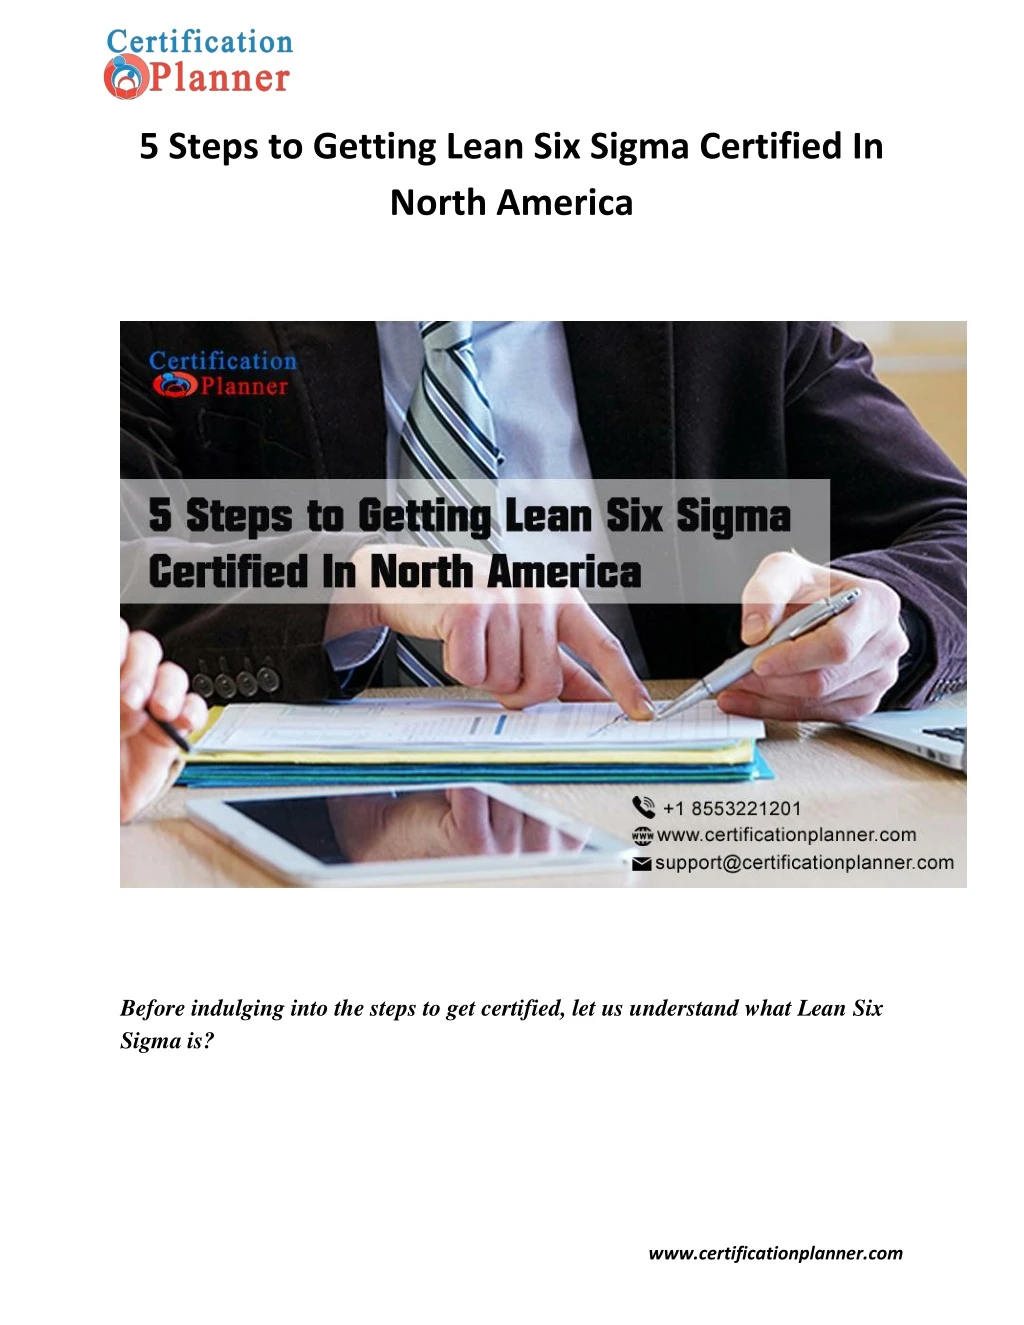 5 steps to getting lean six sigma certified